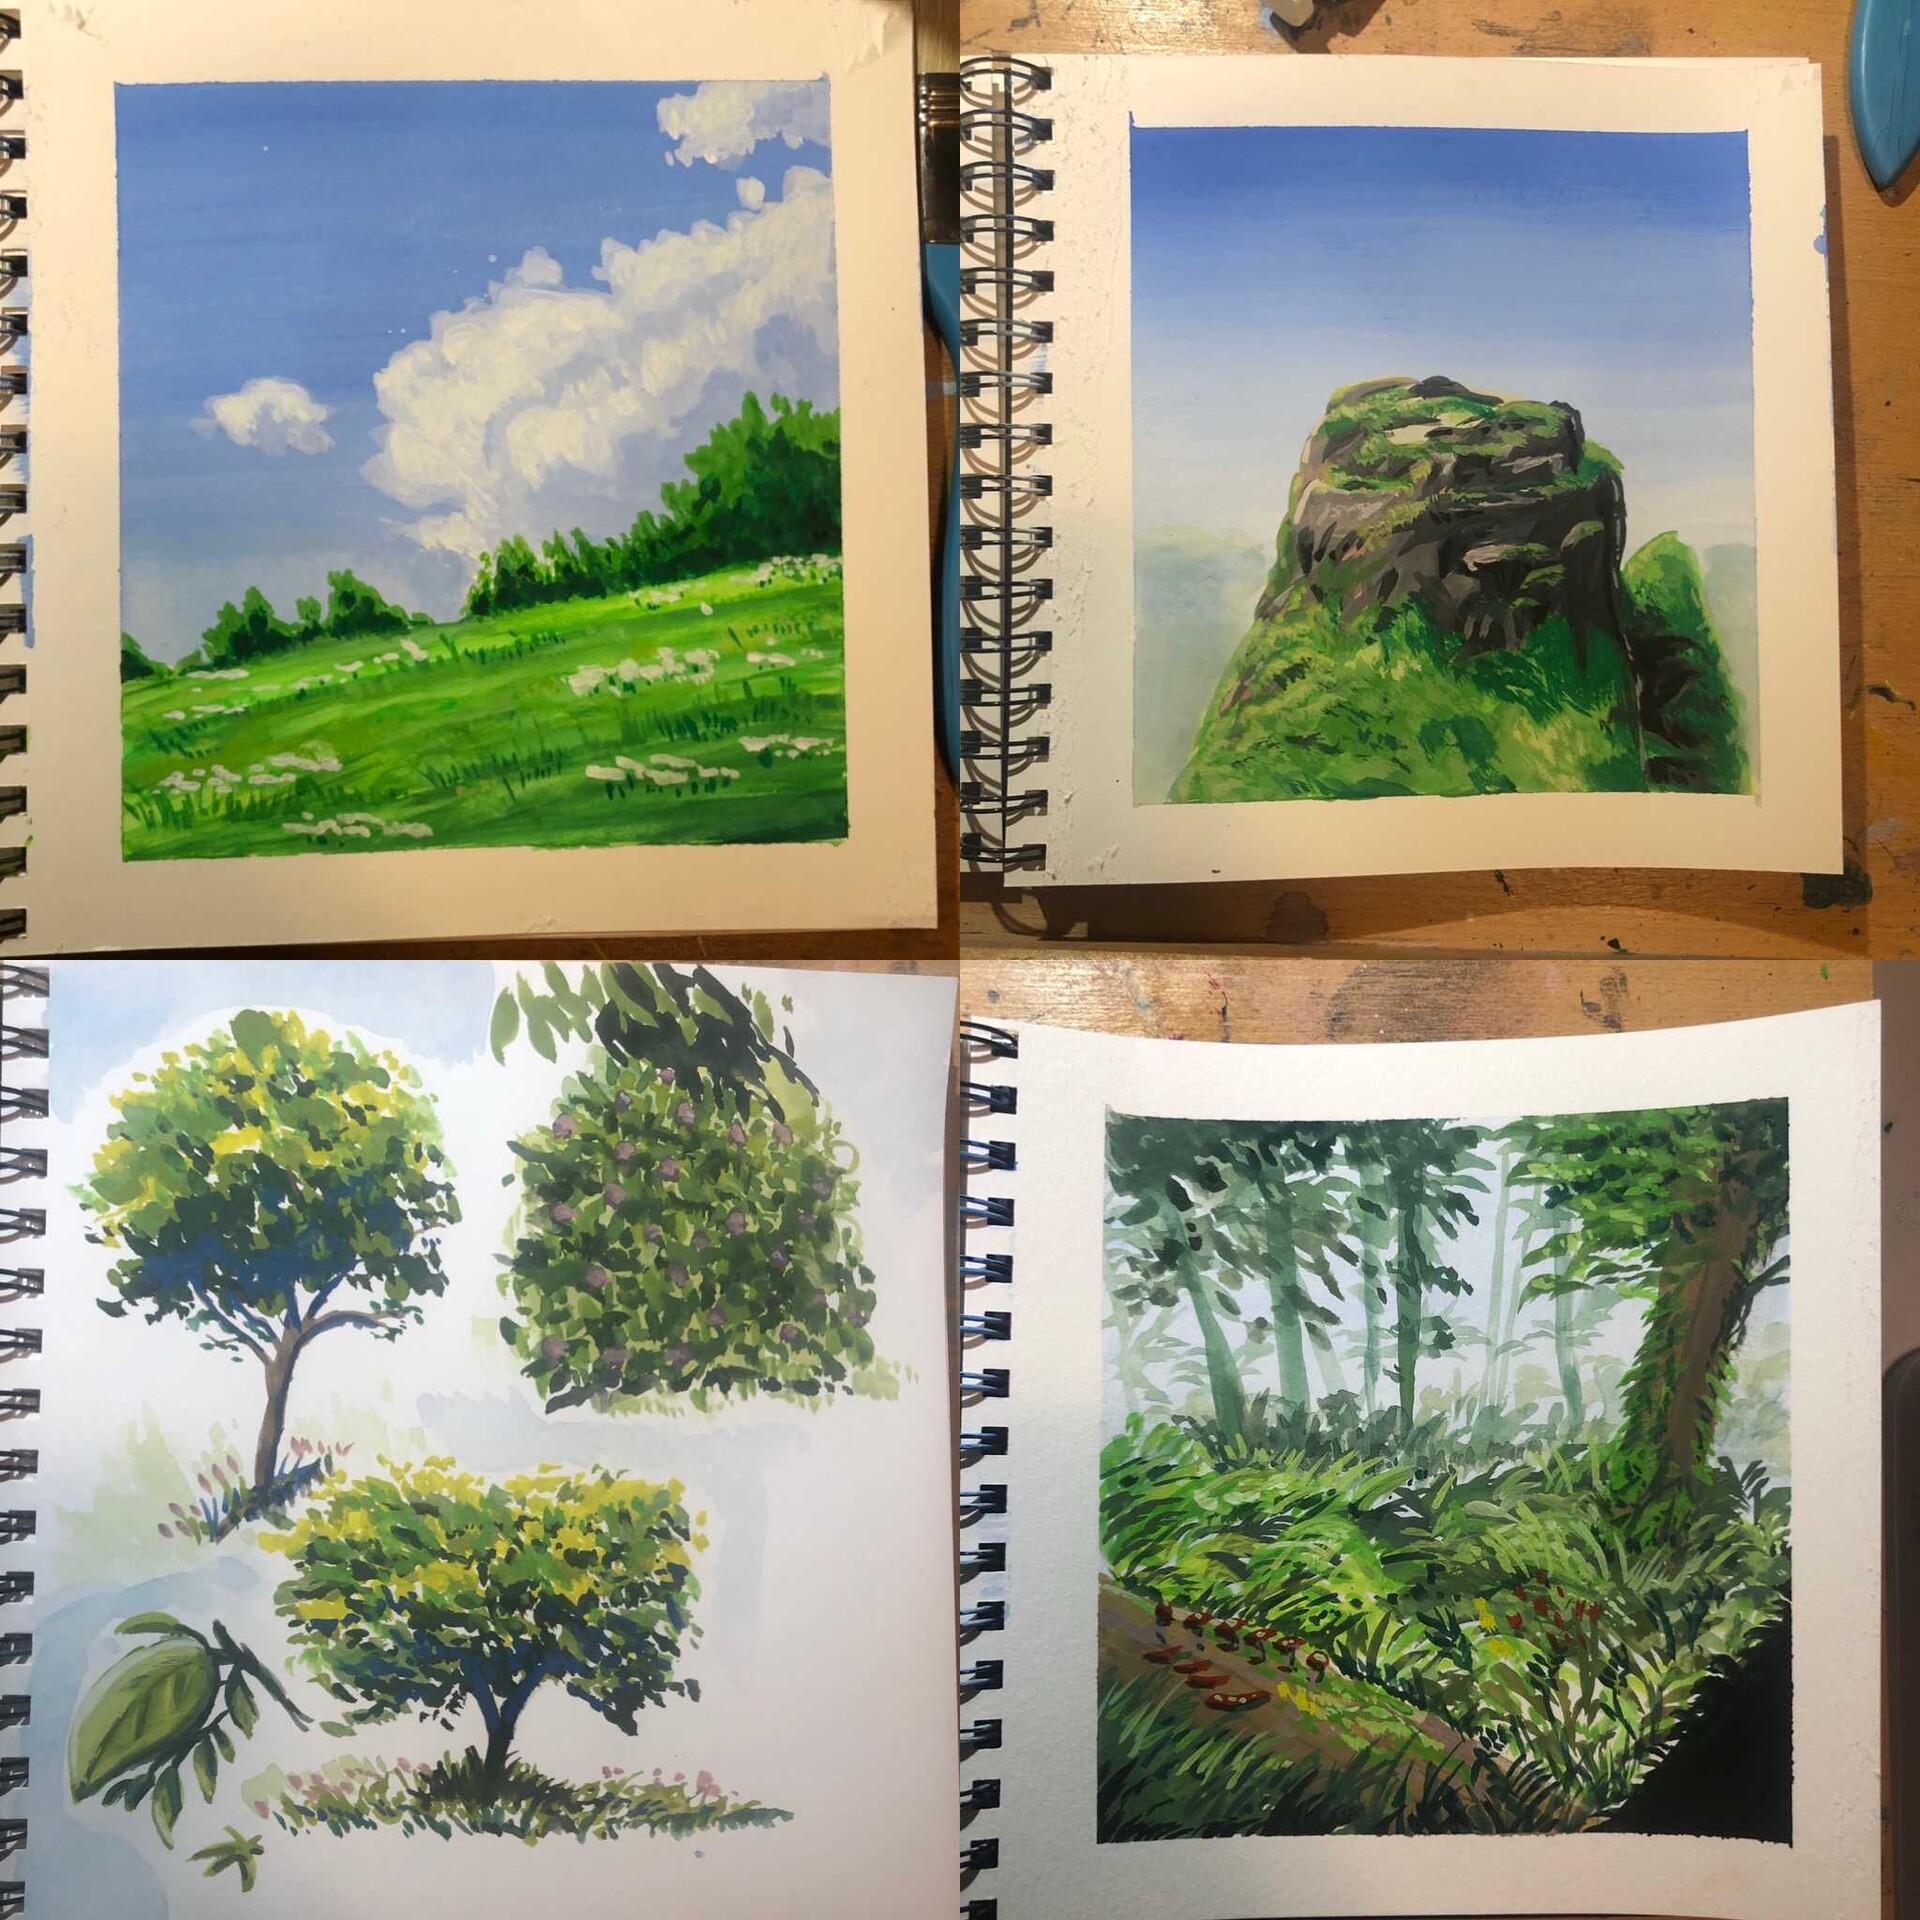 ArtStation - Gouache sketchbook and what not